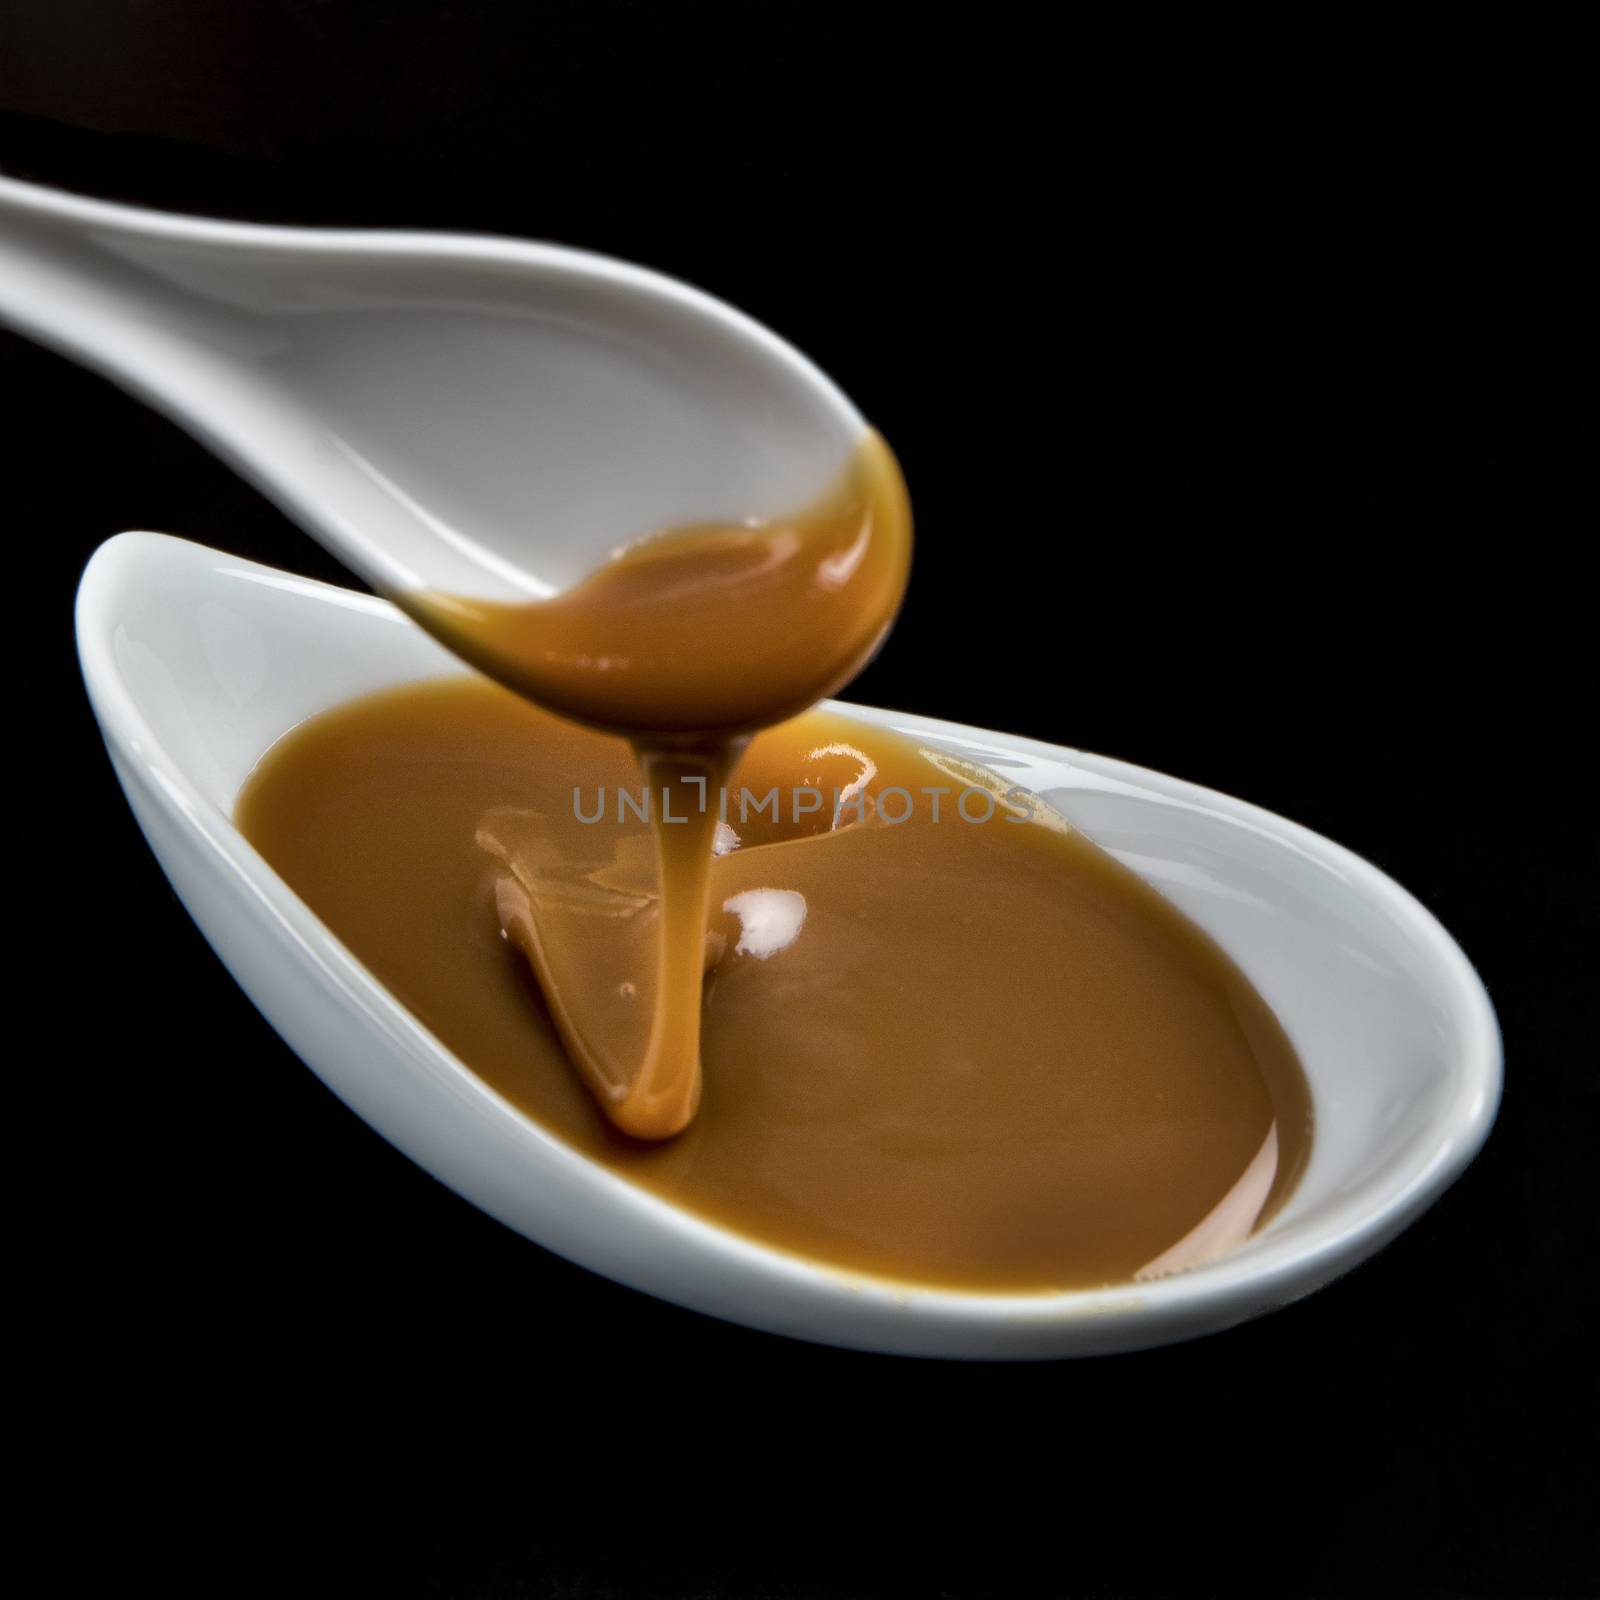 Caramel with salted butter